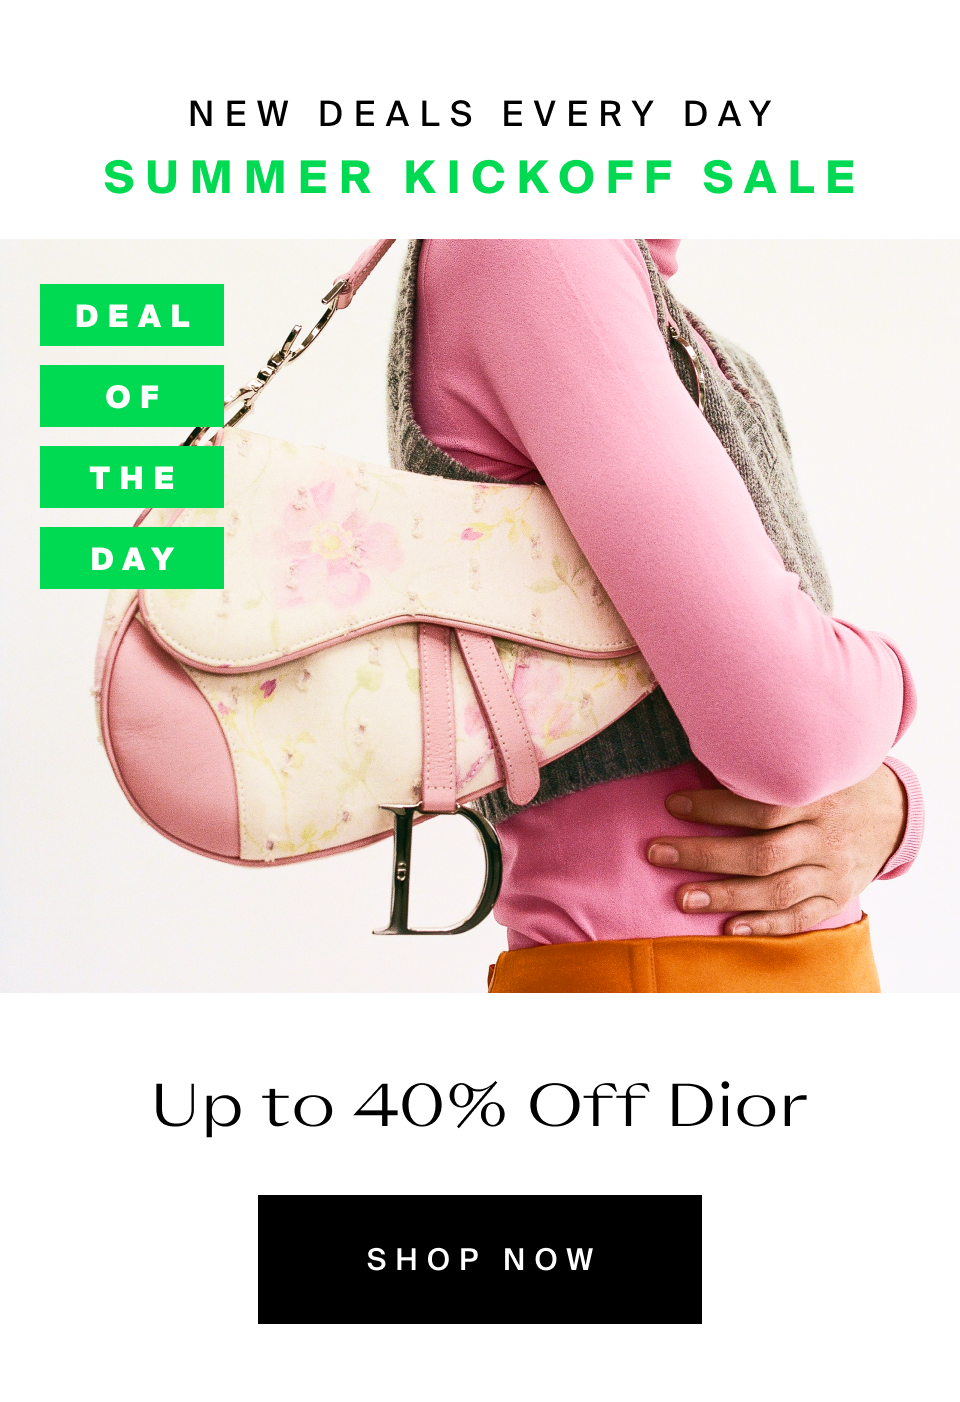 Deal of The Day: Christian Dior